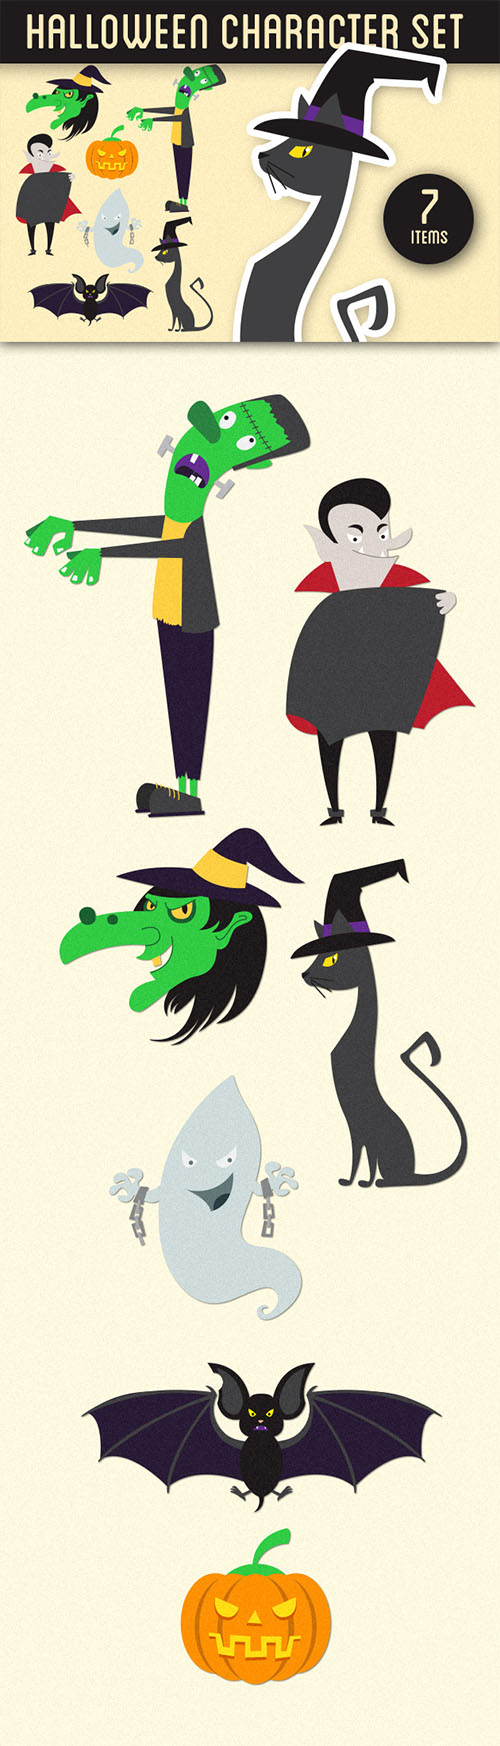 Halloween Characters Vector Illustrations Pack 1